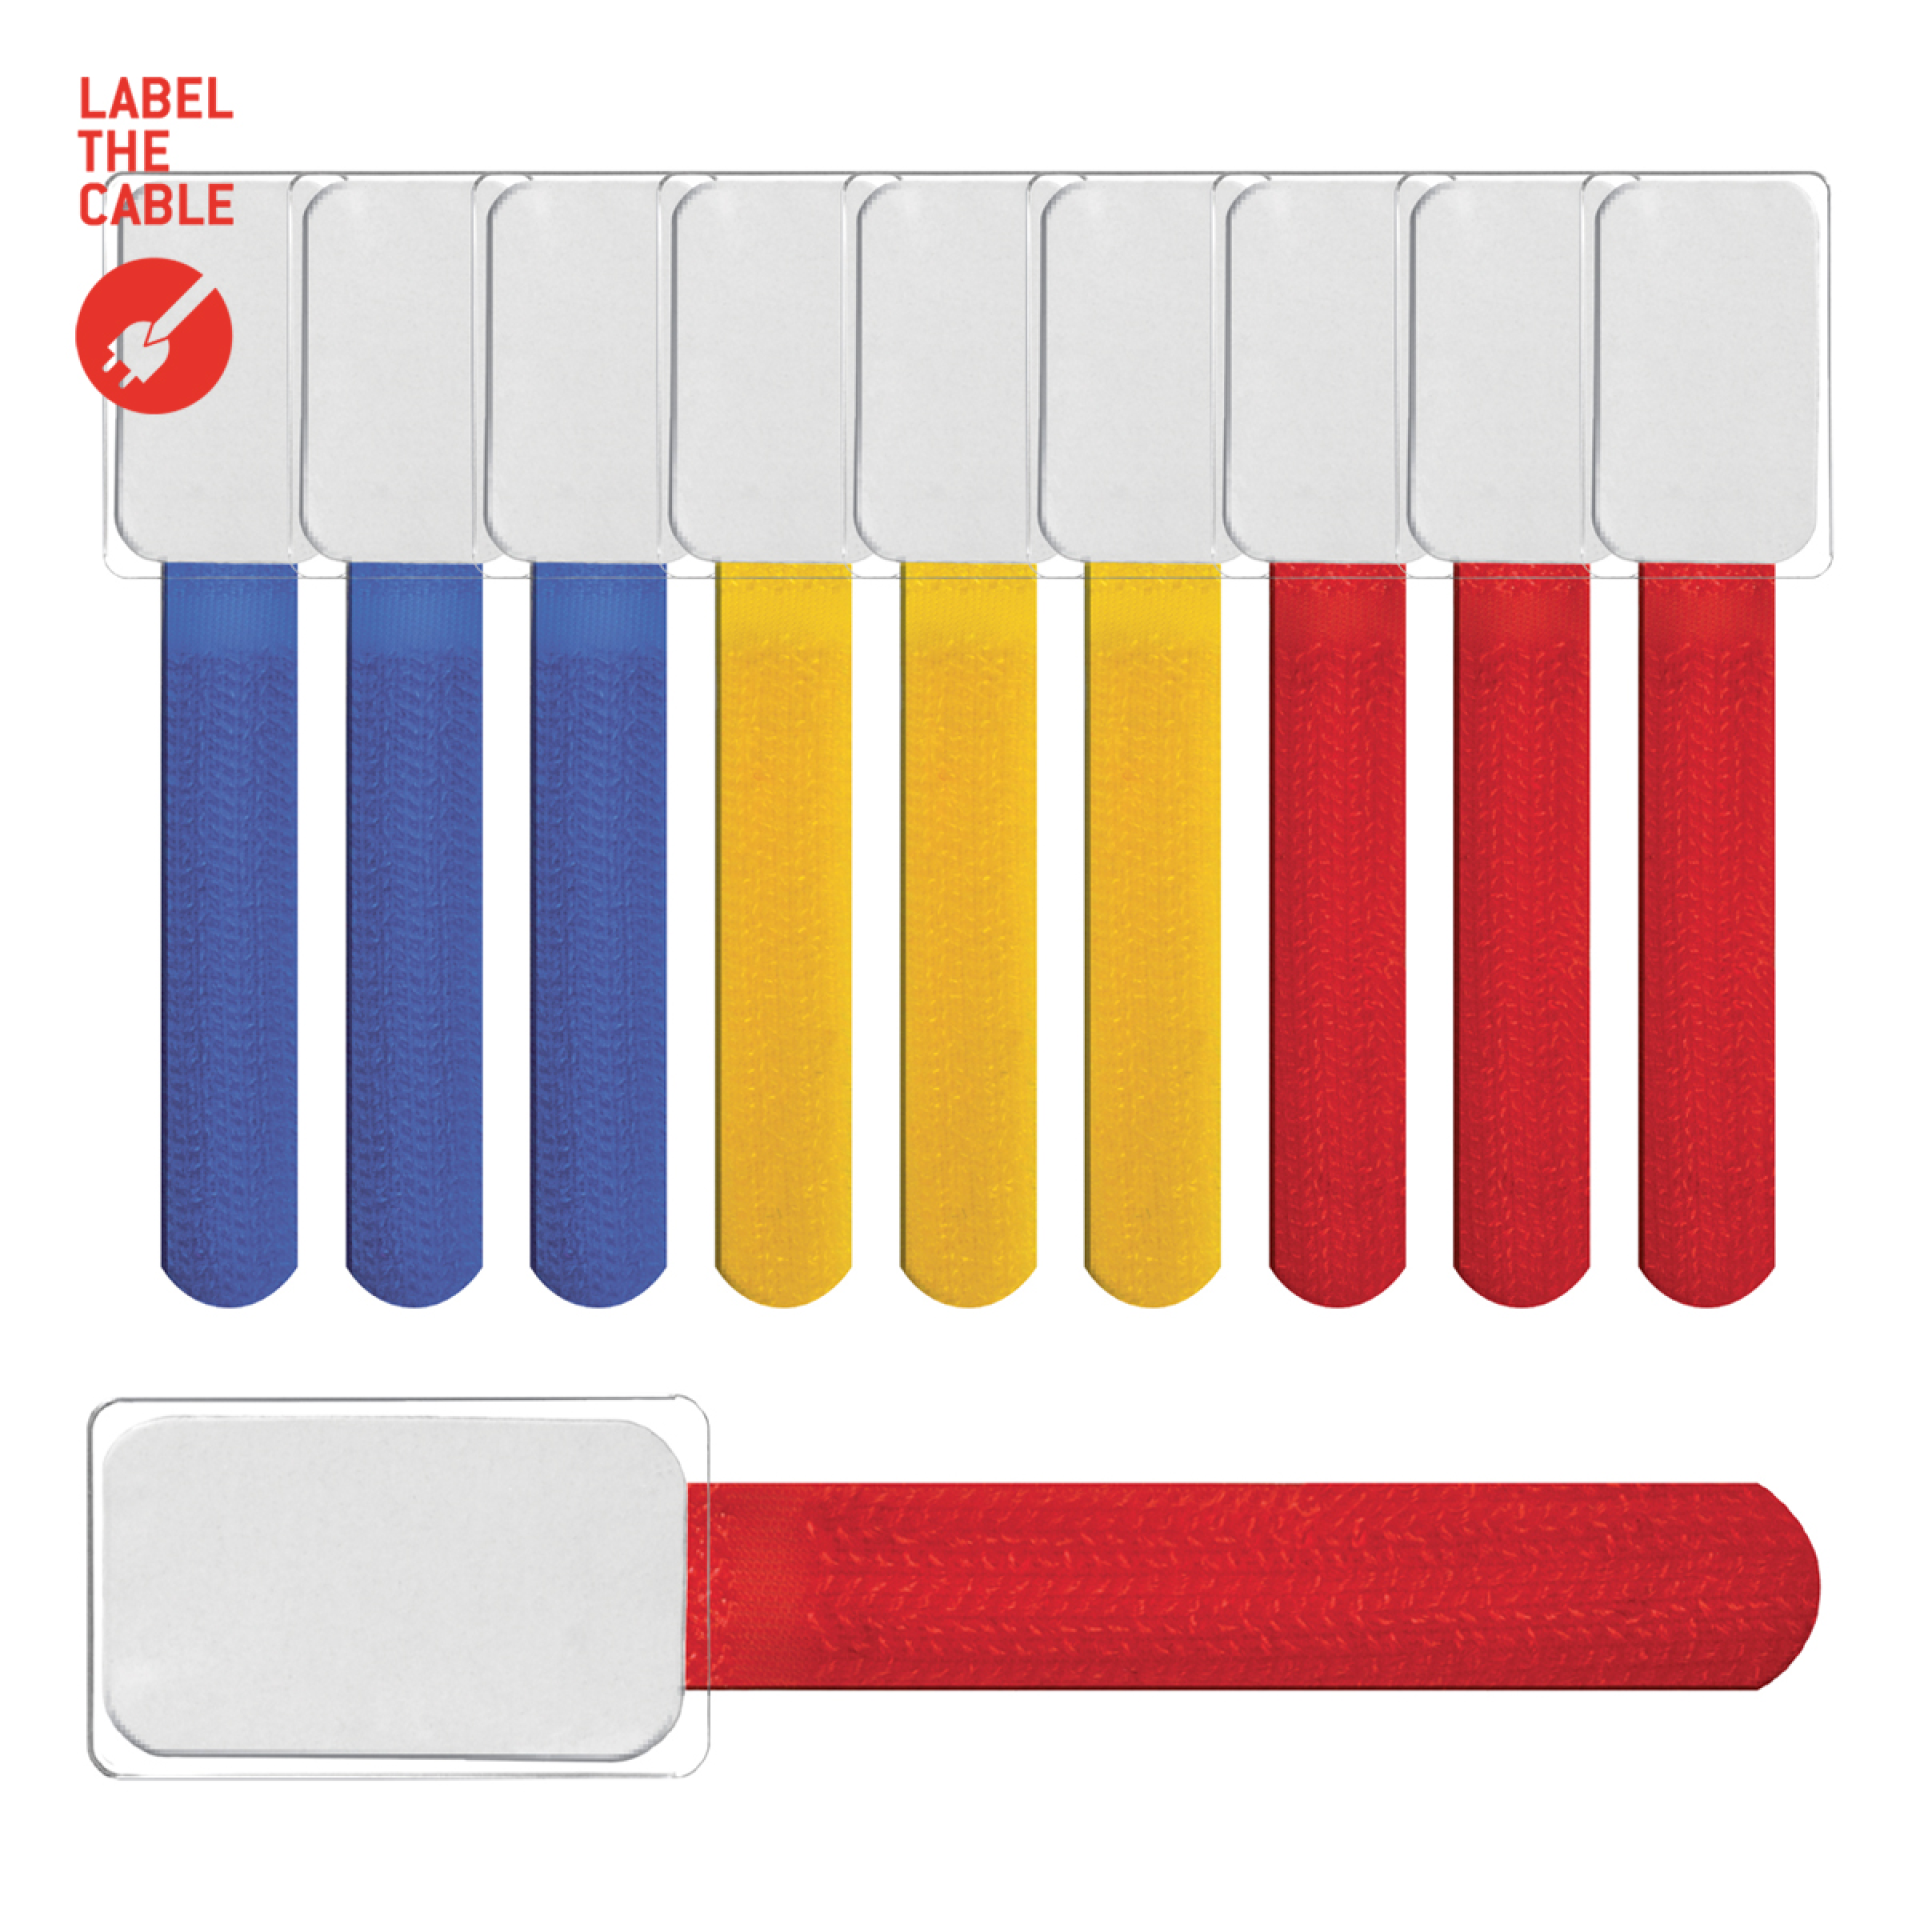 LTC MINI TAGS small hook and loop straps with tags set of 10 pcs yellow/blue/red